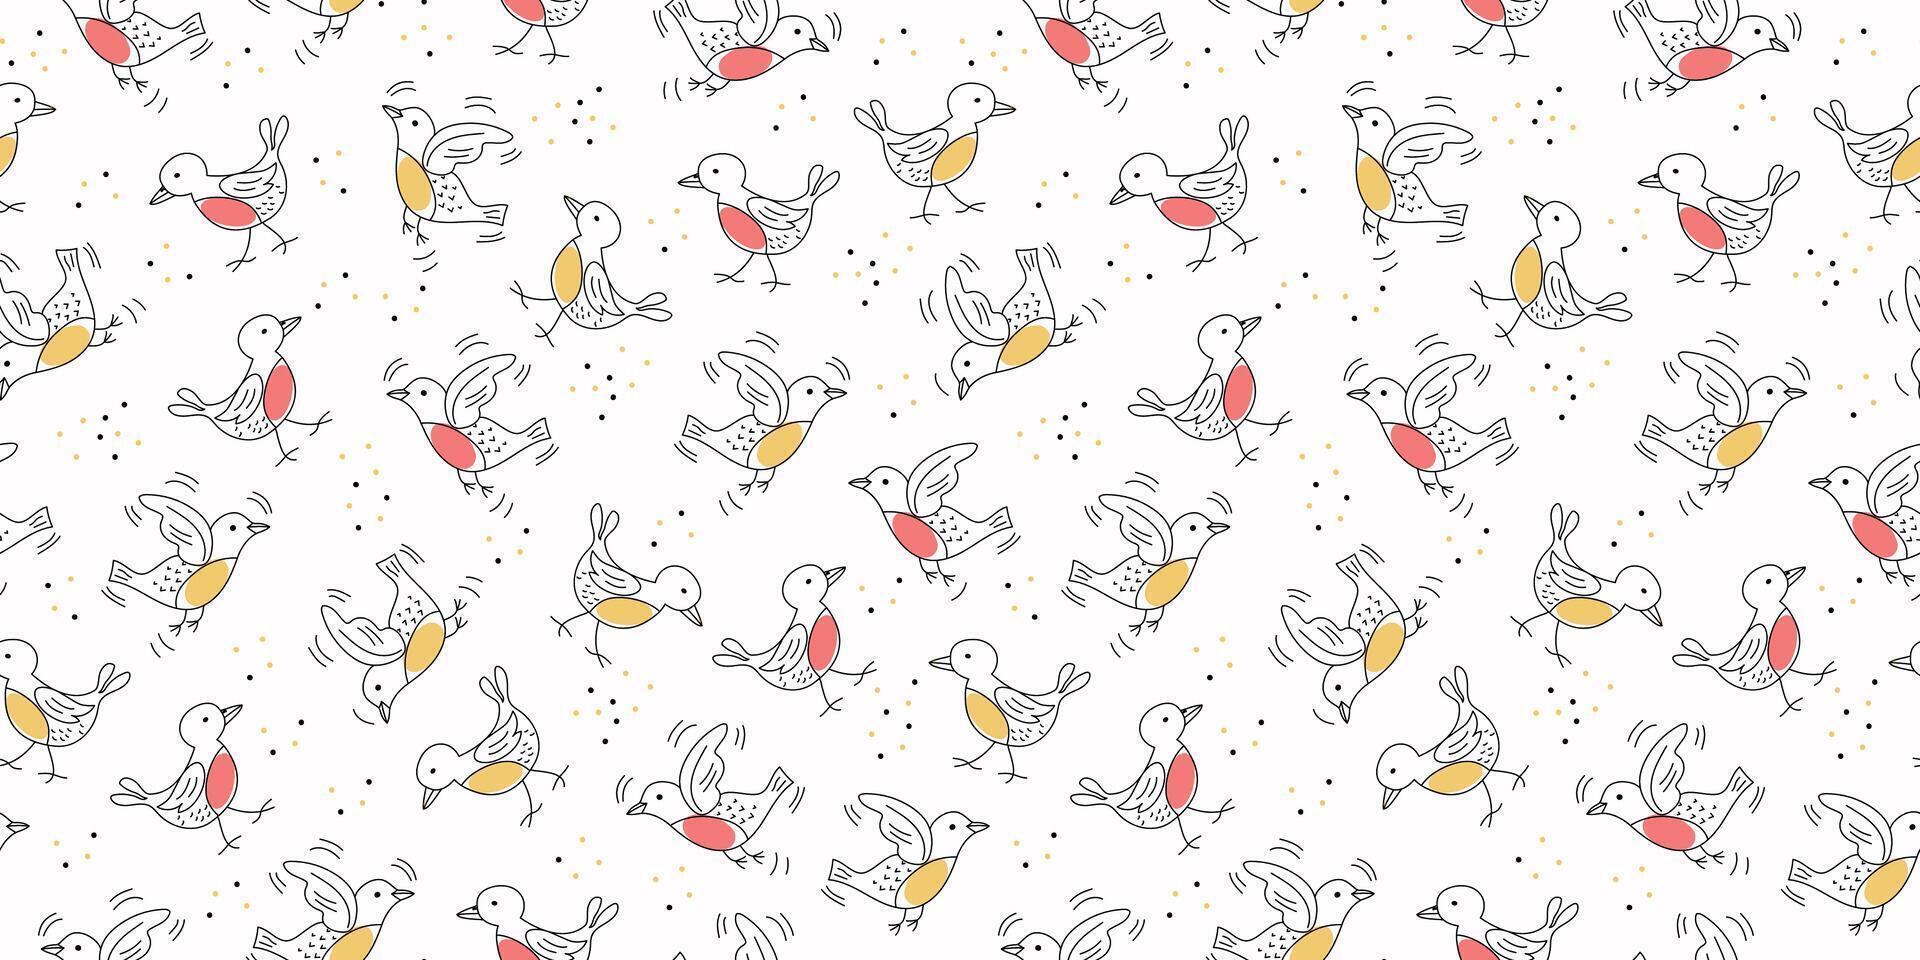 Birds pattern, doodle drawings. Abstract birds. seamless background. vector